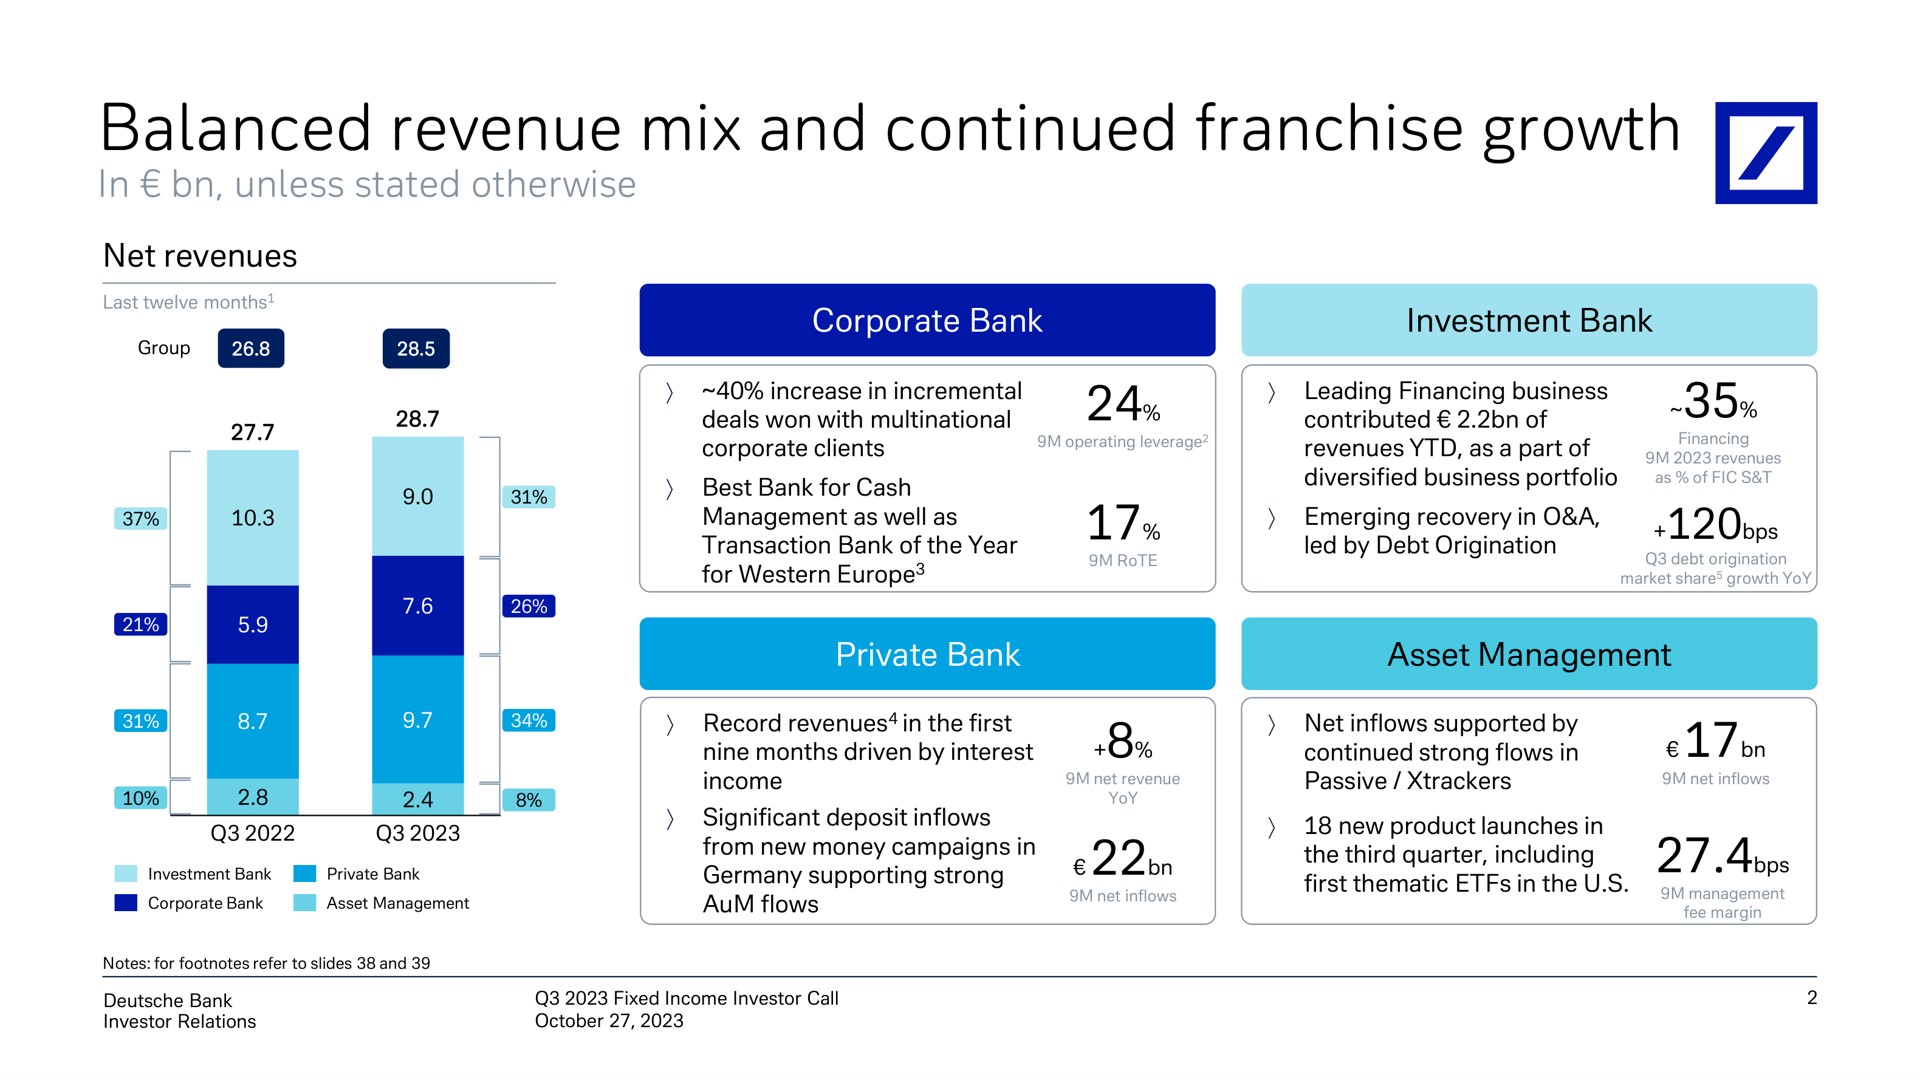 balanced revenue mix and continued franchise growth | Deutsche Bank